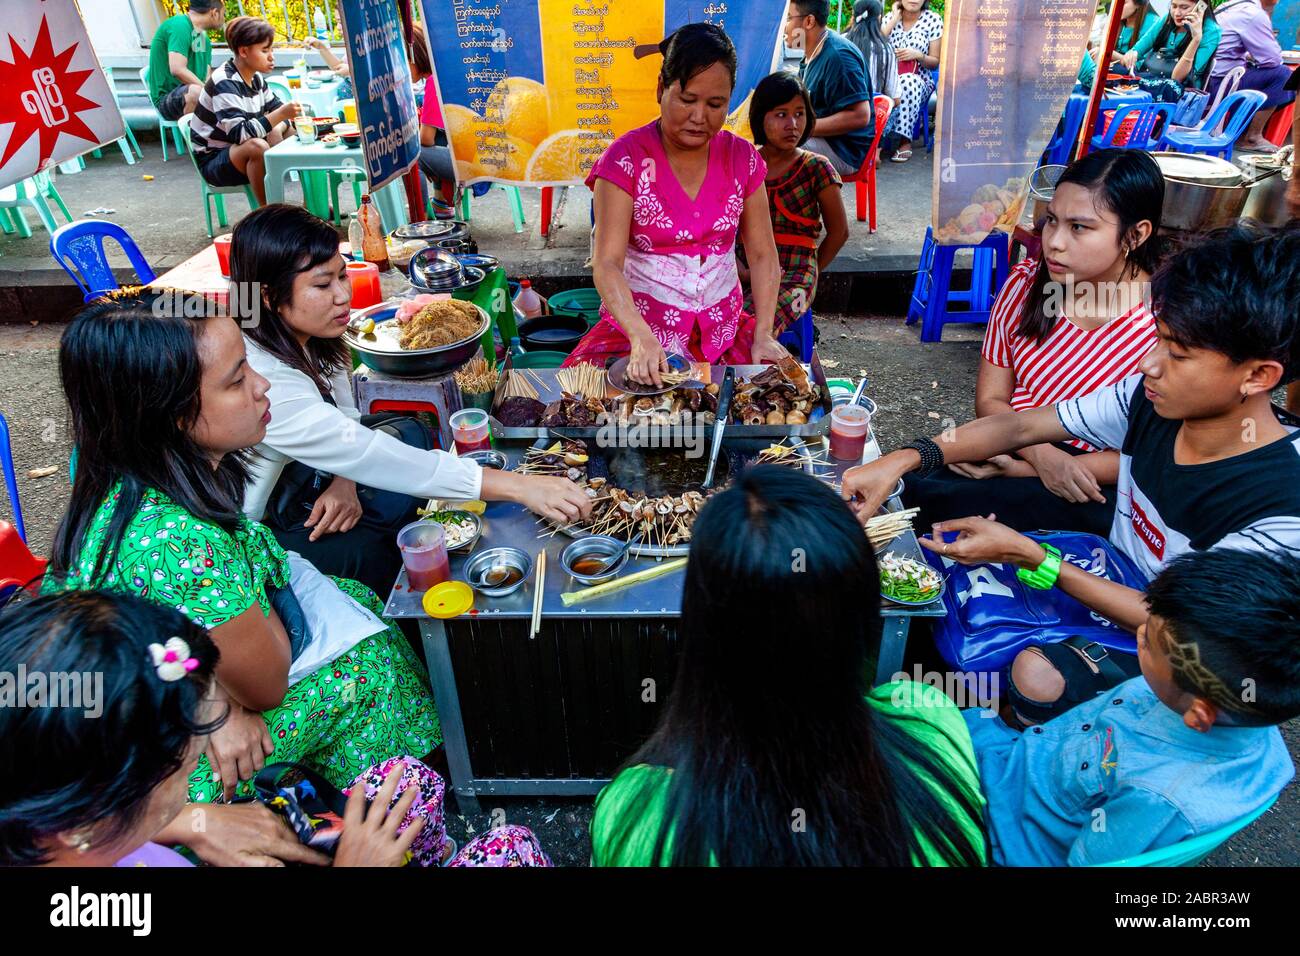 A Group Of Young People Eating Street Food From A Stall In Downtown Yangon, Yangon, Myanmar. Stock Photo